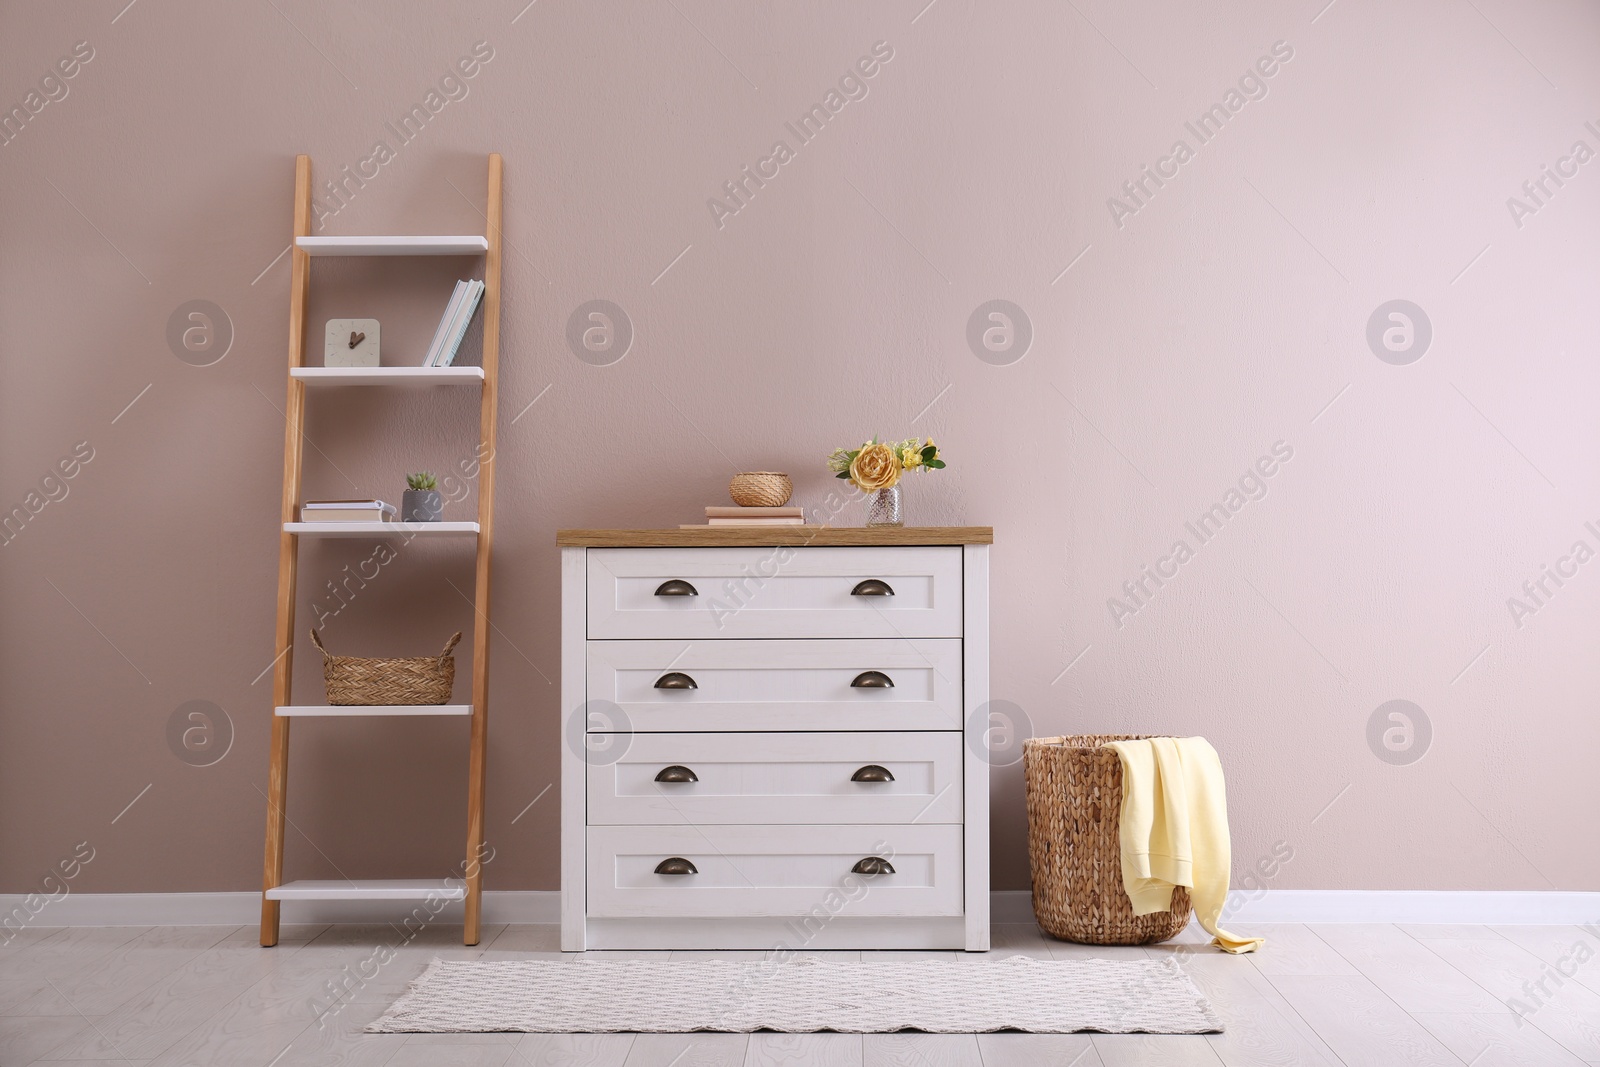 Photo of Elegant room interior with stylish chest of drawers, shelving unit and wicker basket